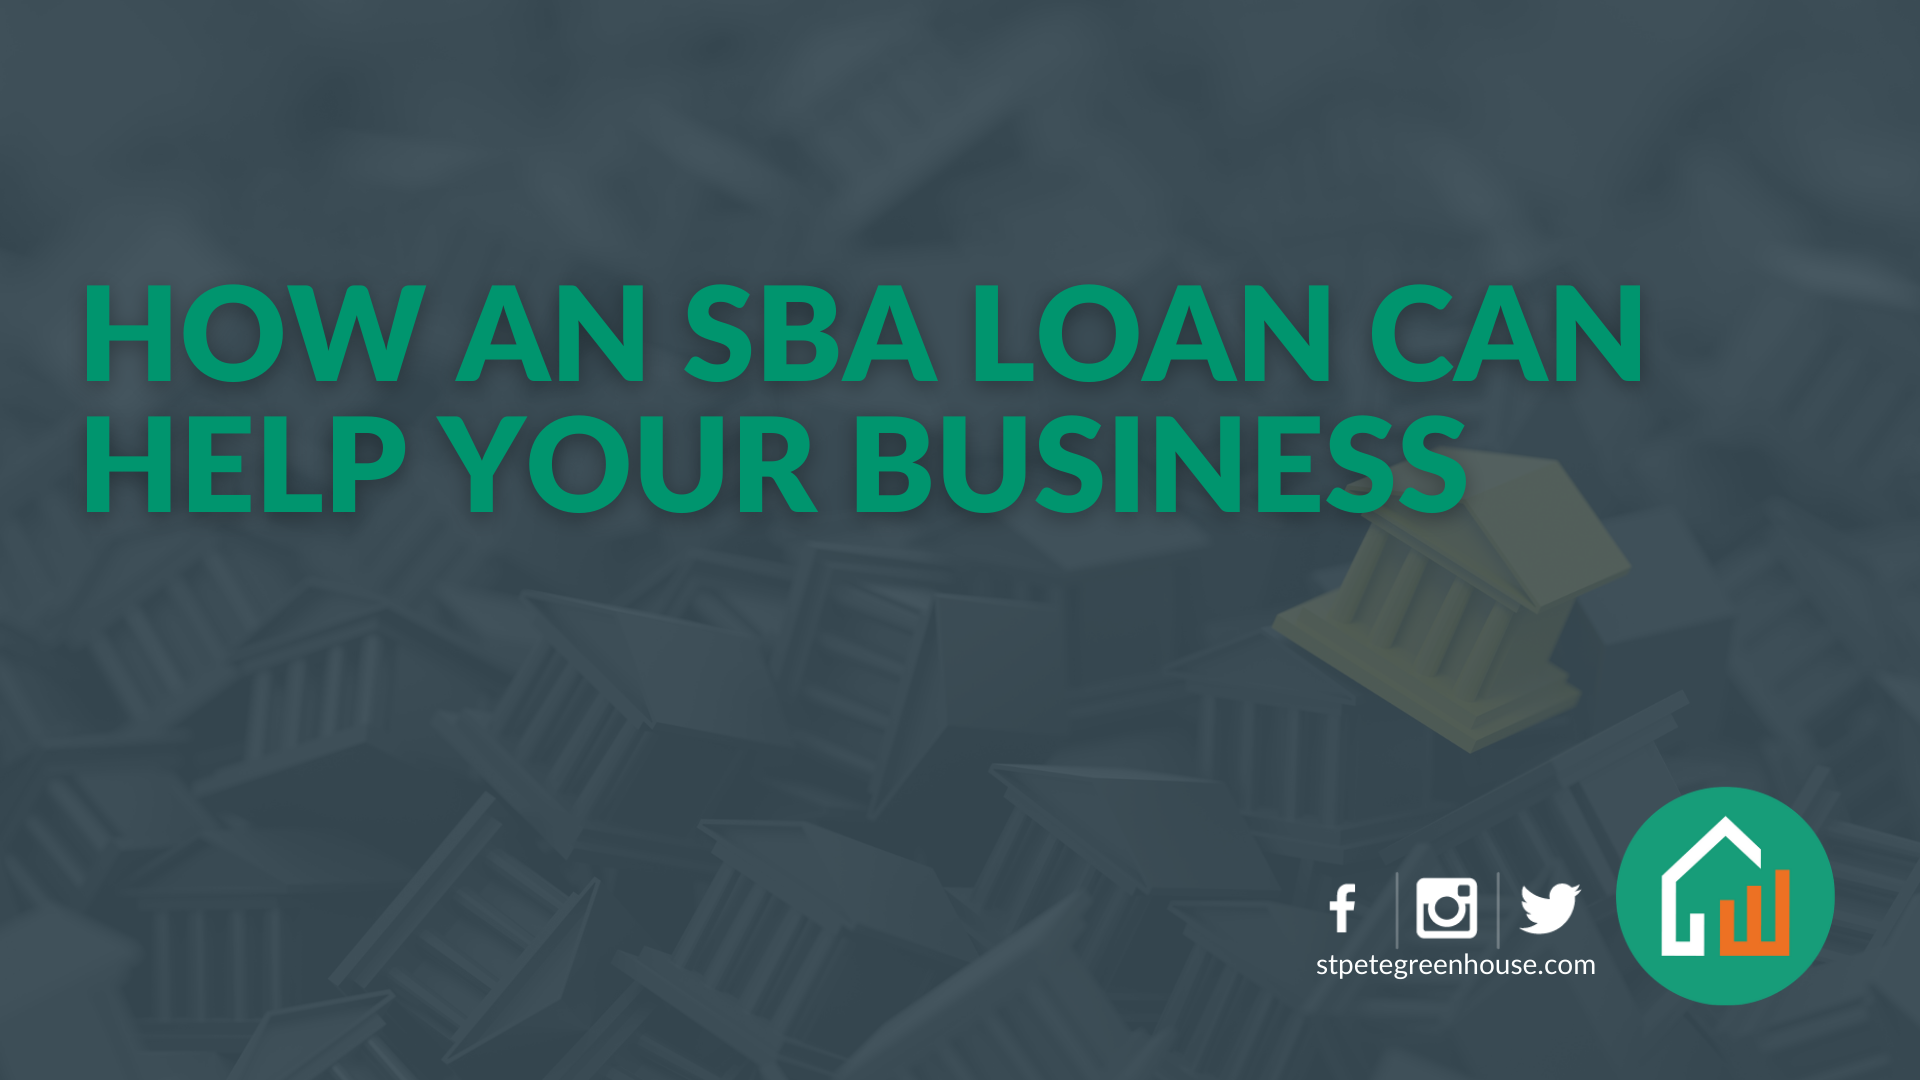 How an SBA Loan Can Help Your Business-image